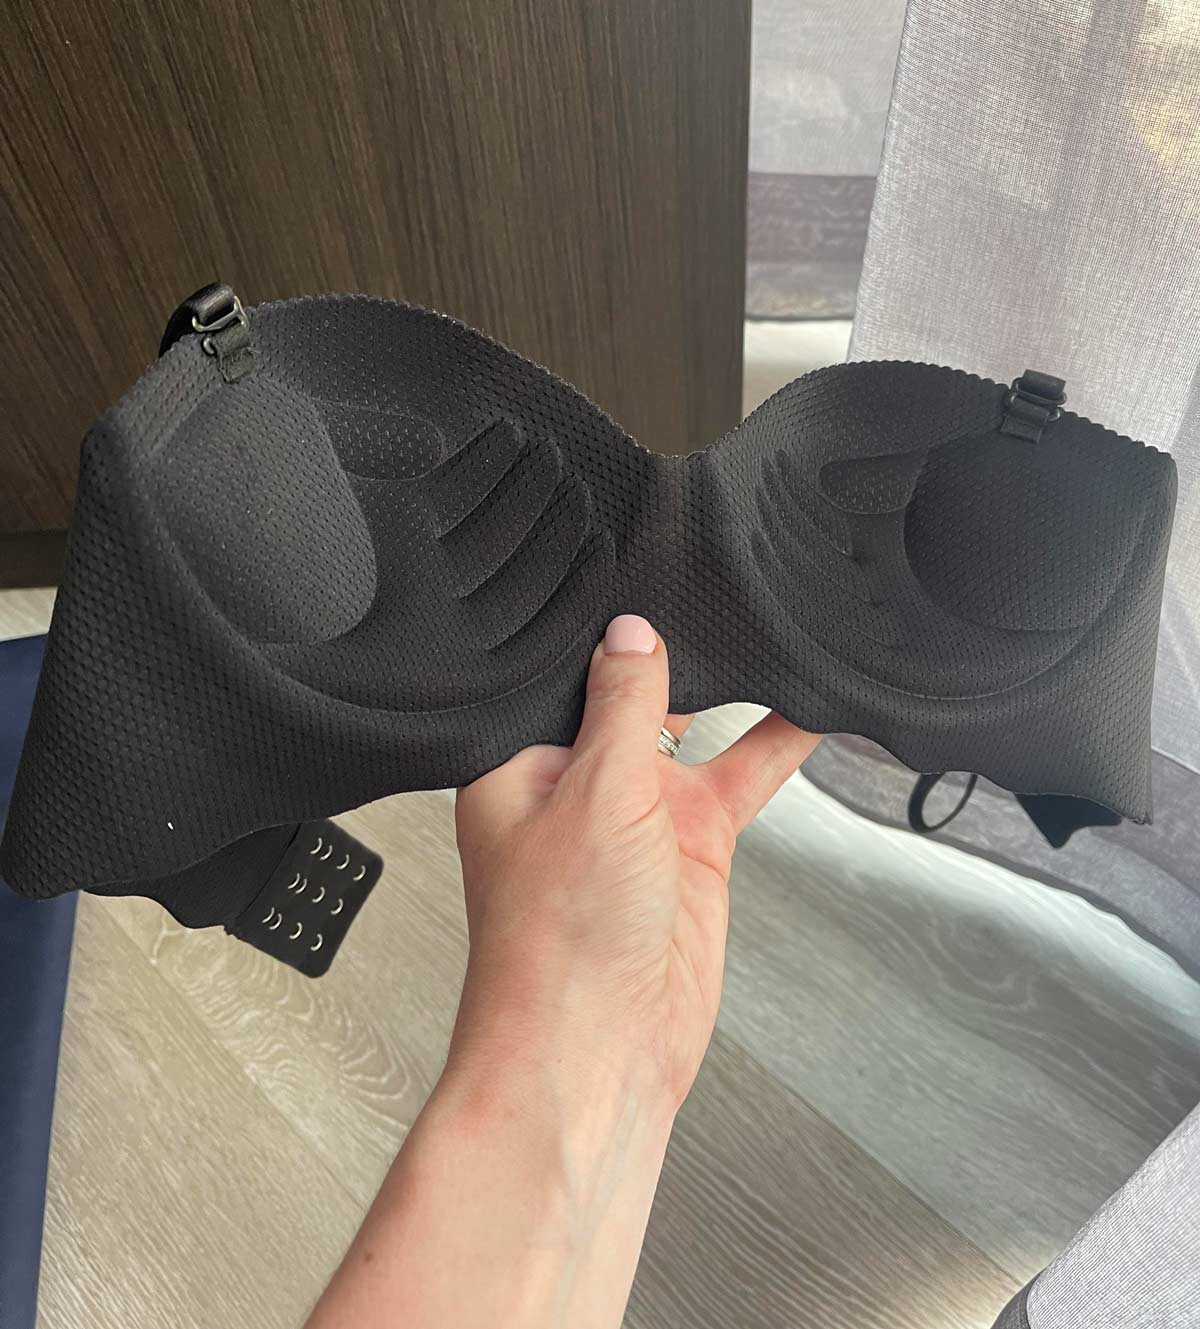 My new bra has hands built inside the cups